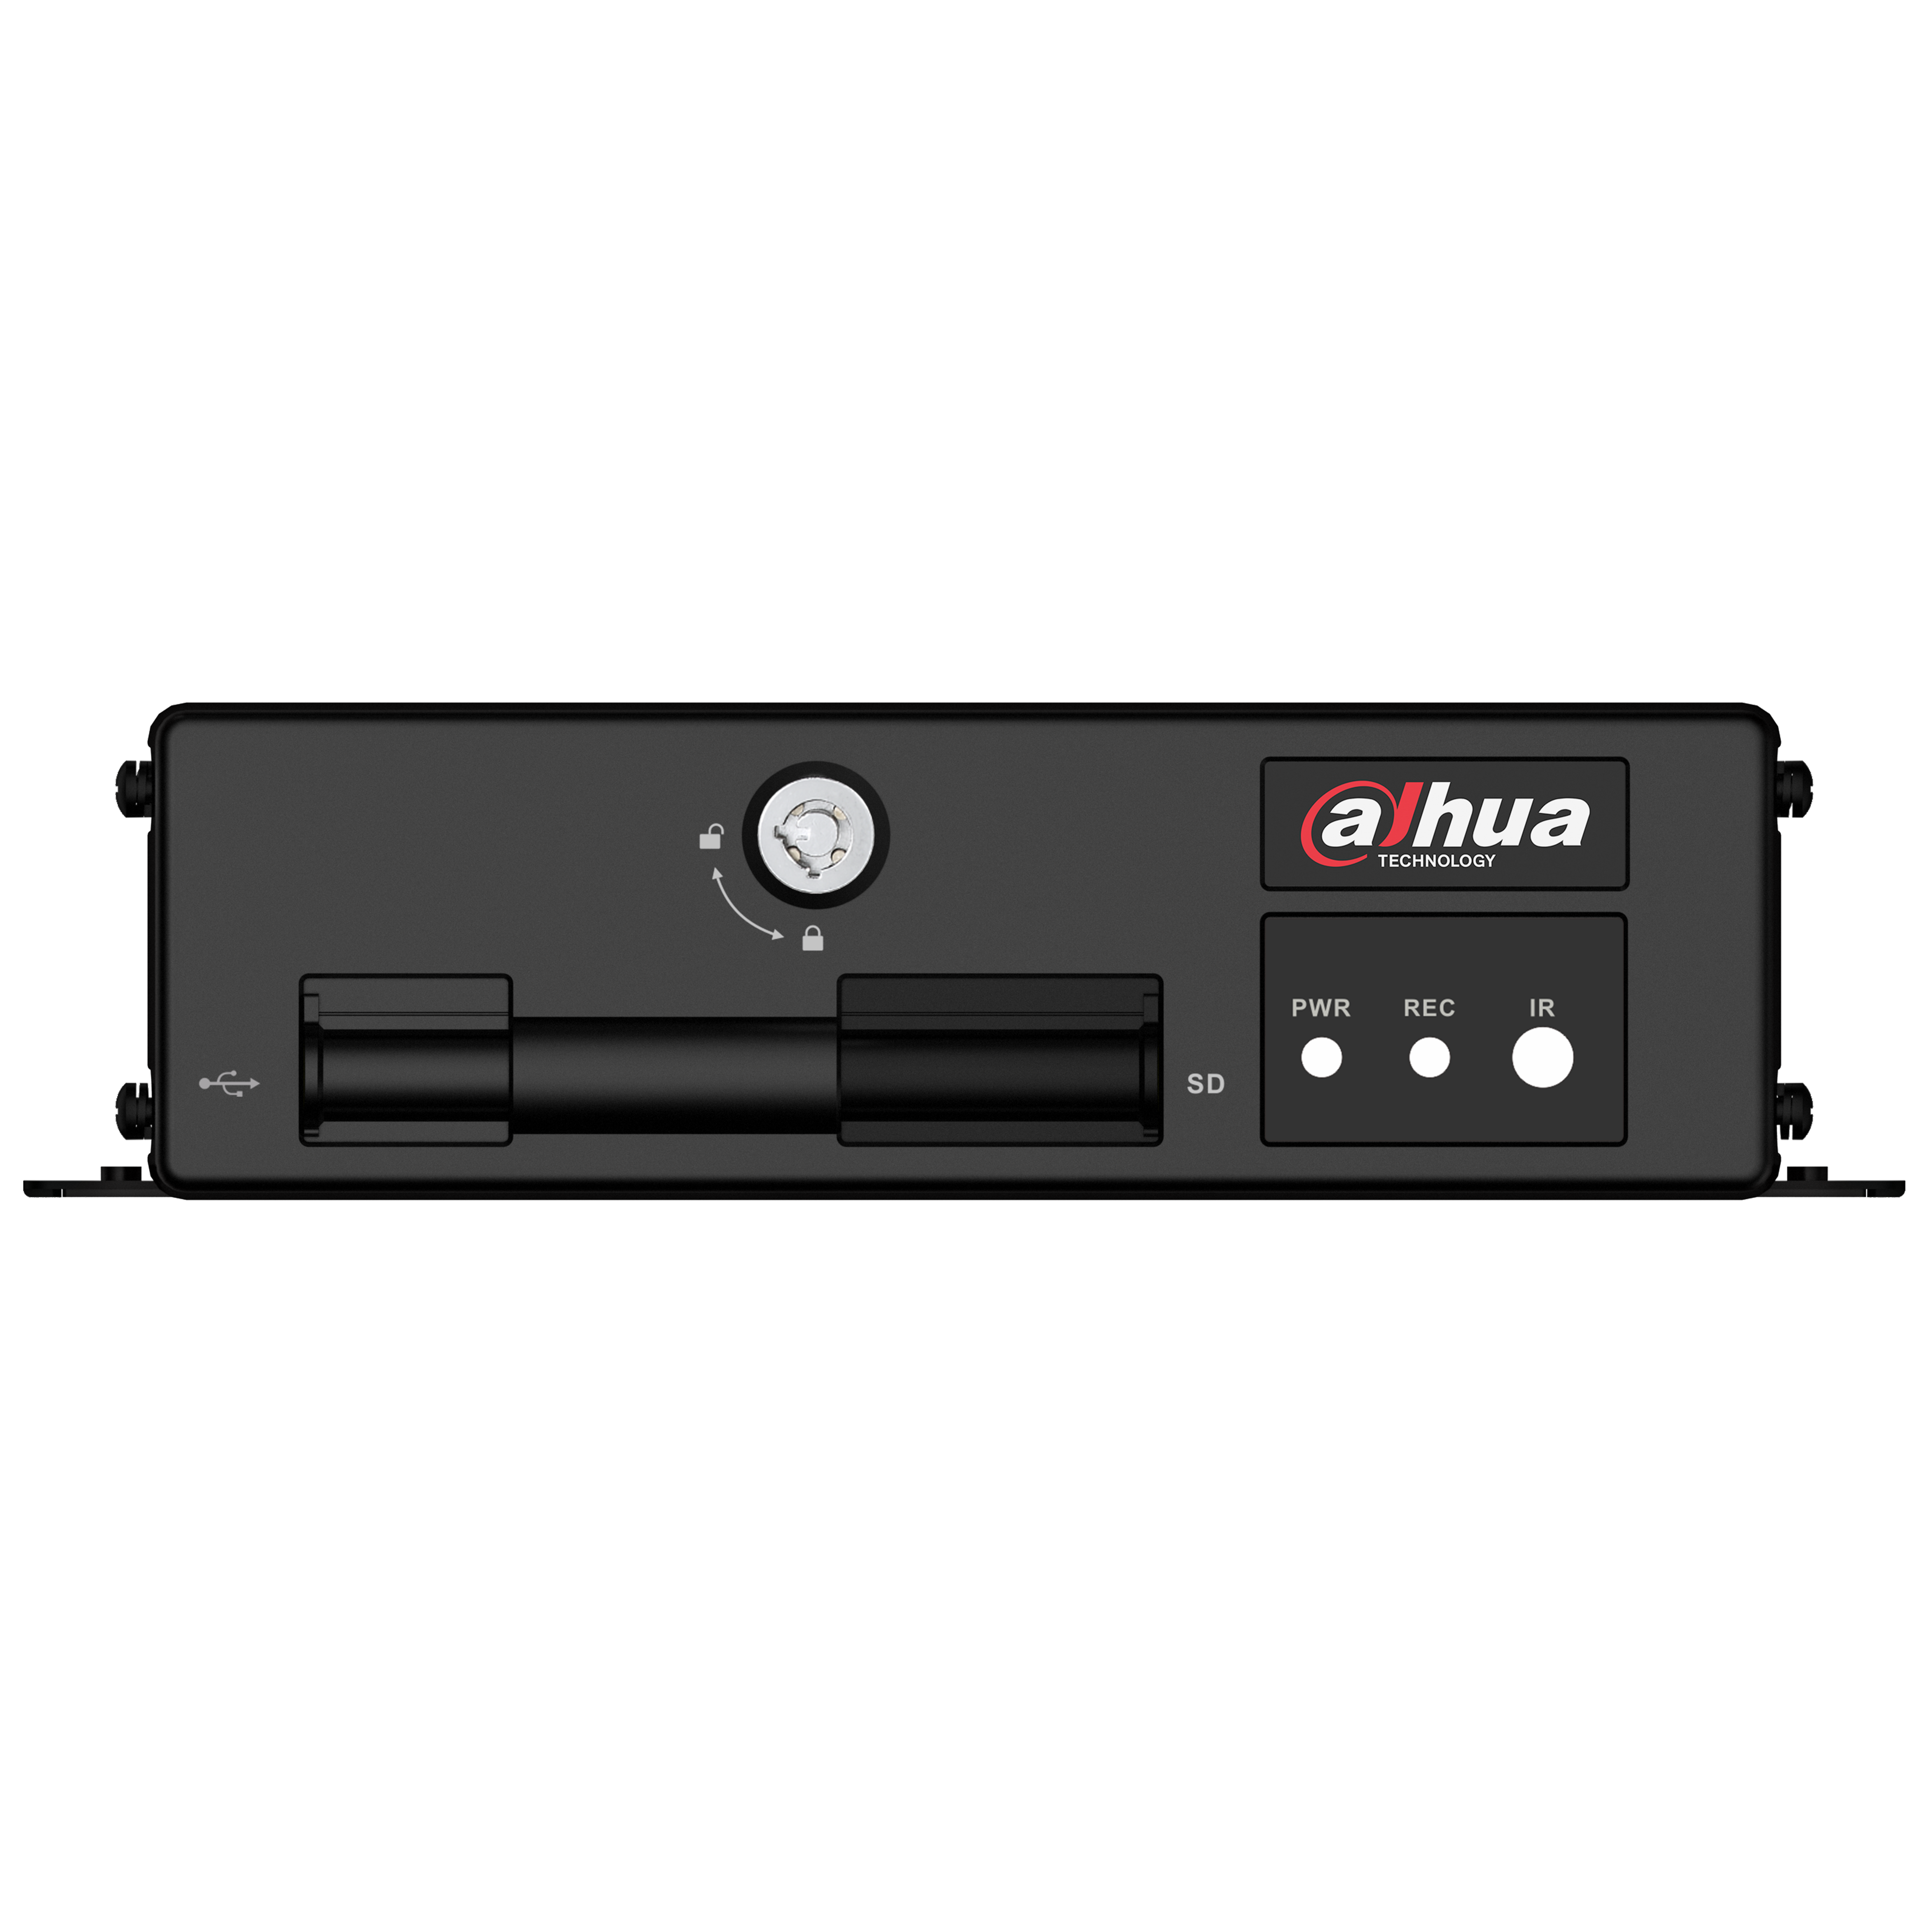 DAHUA DHI-MXVR1004 4 Channels H.265 Penta-brid 2 SD Mobile Video Recorder